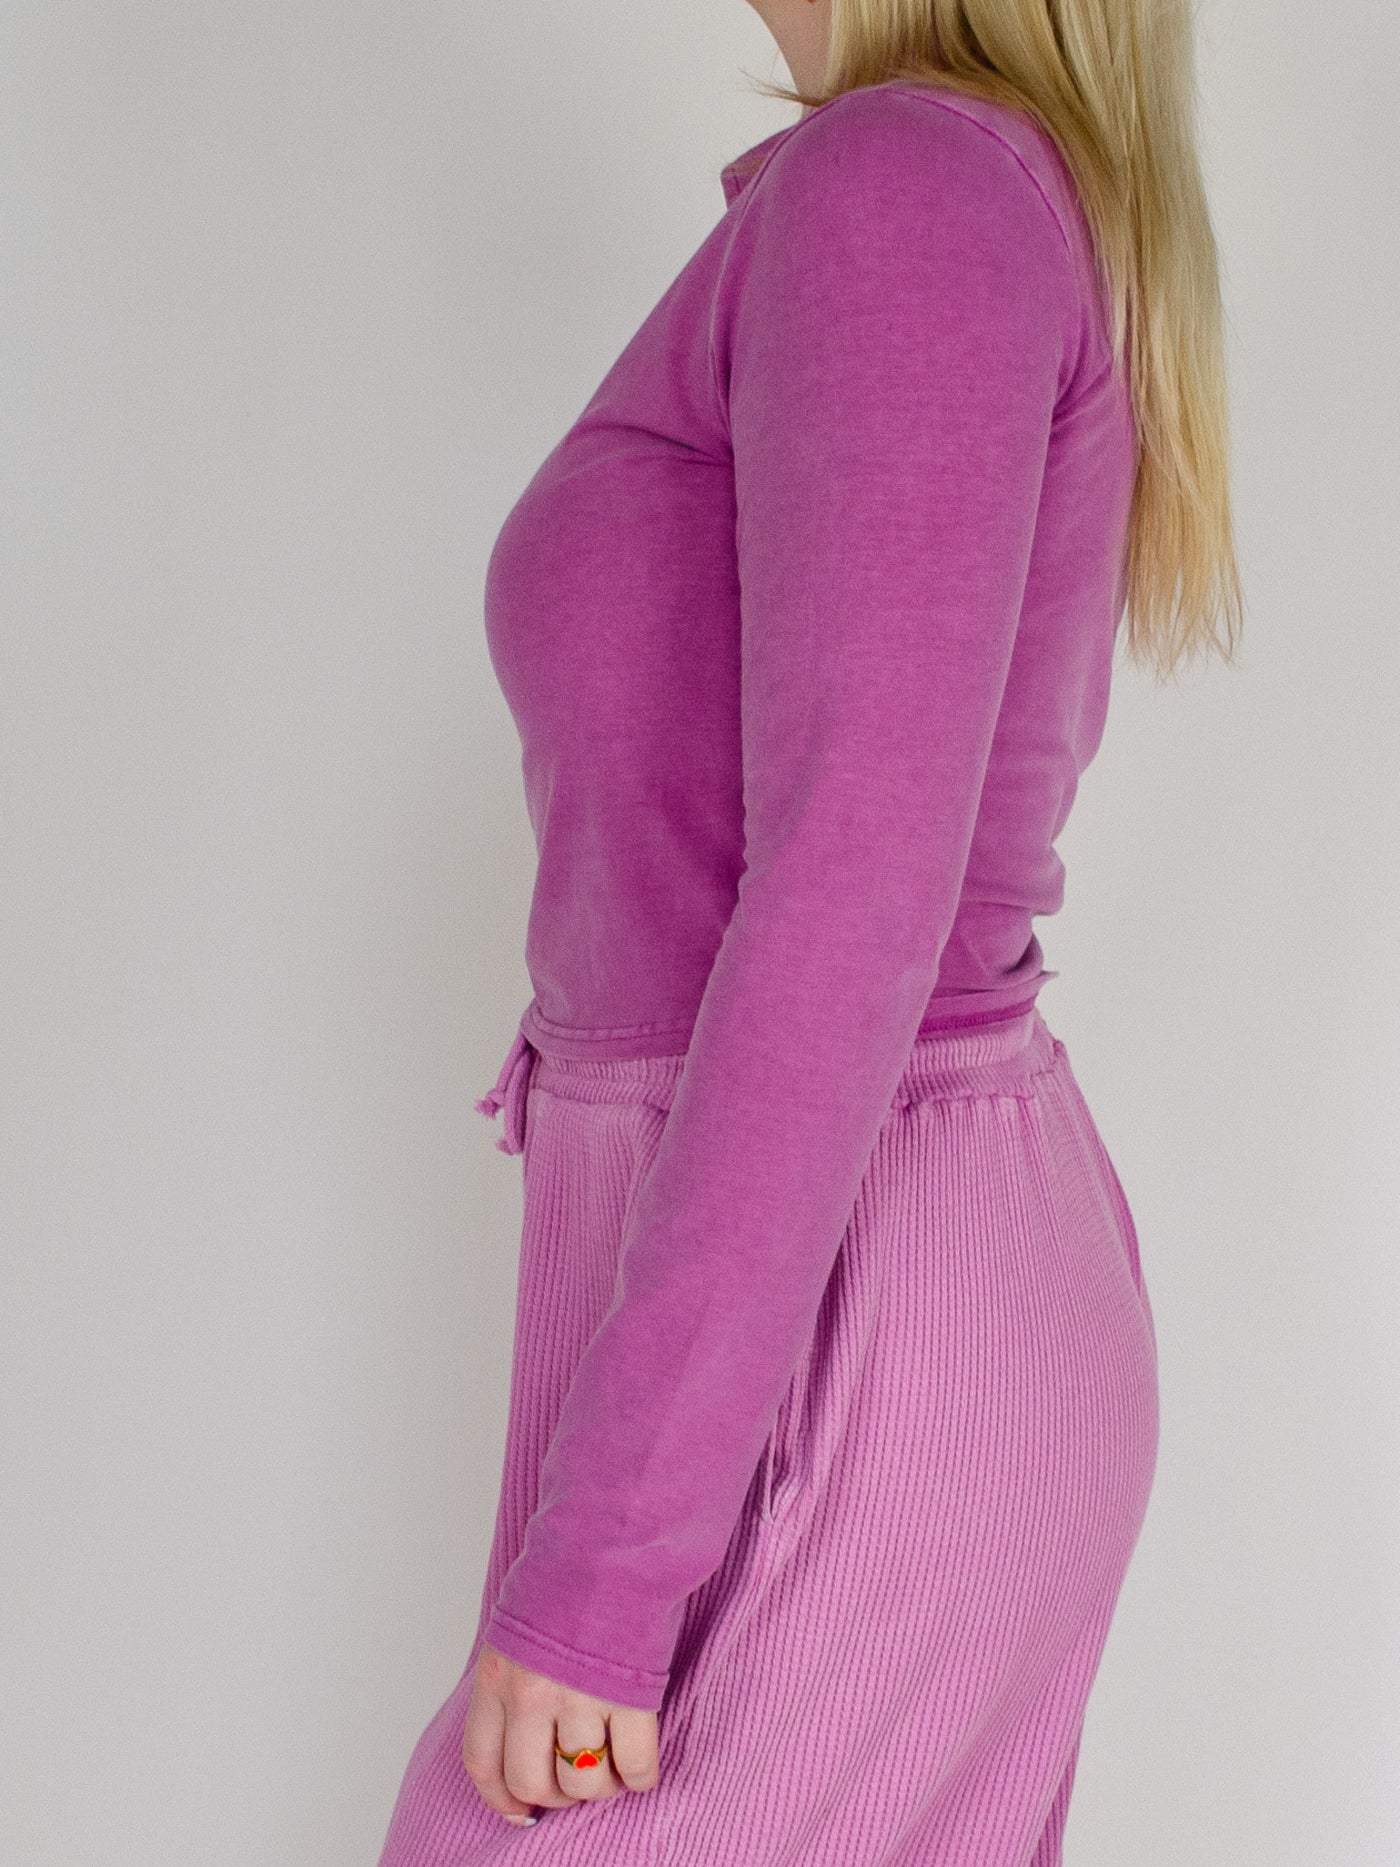 Model wearing cropped purple half zip with high waisted ribbed purple sweatpants and white tennis shoes.